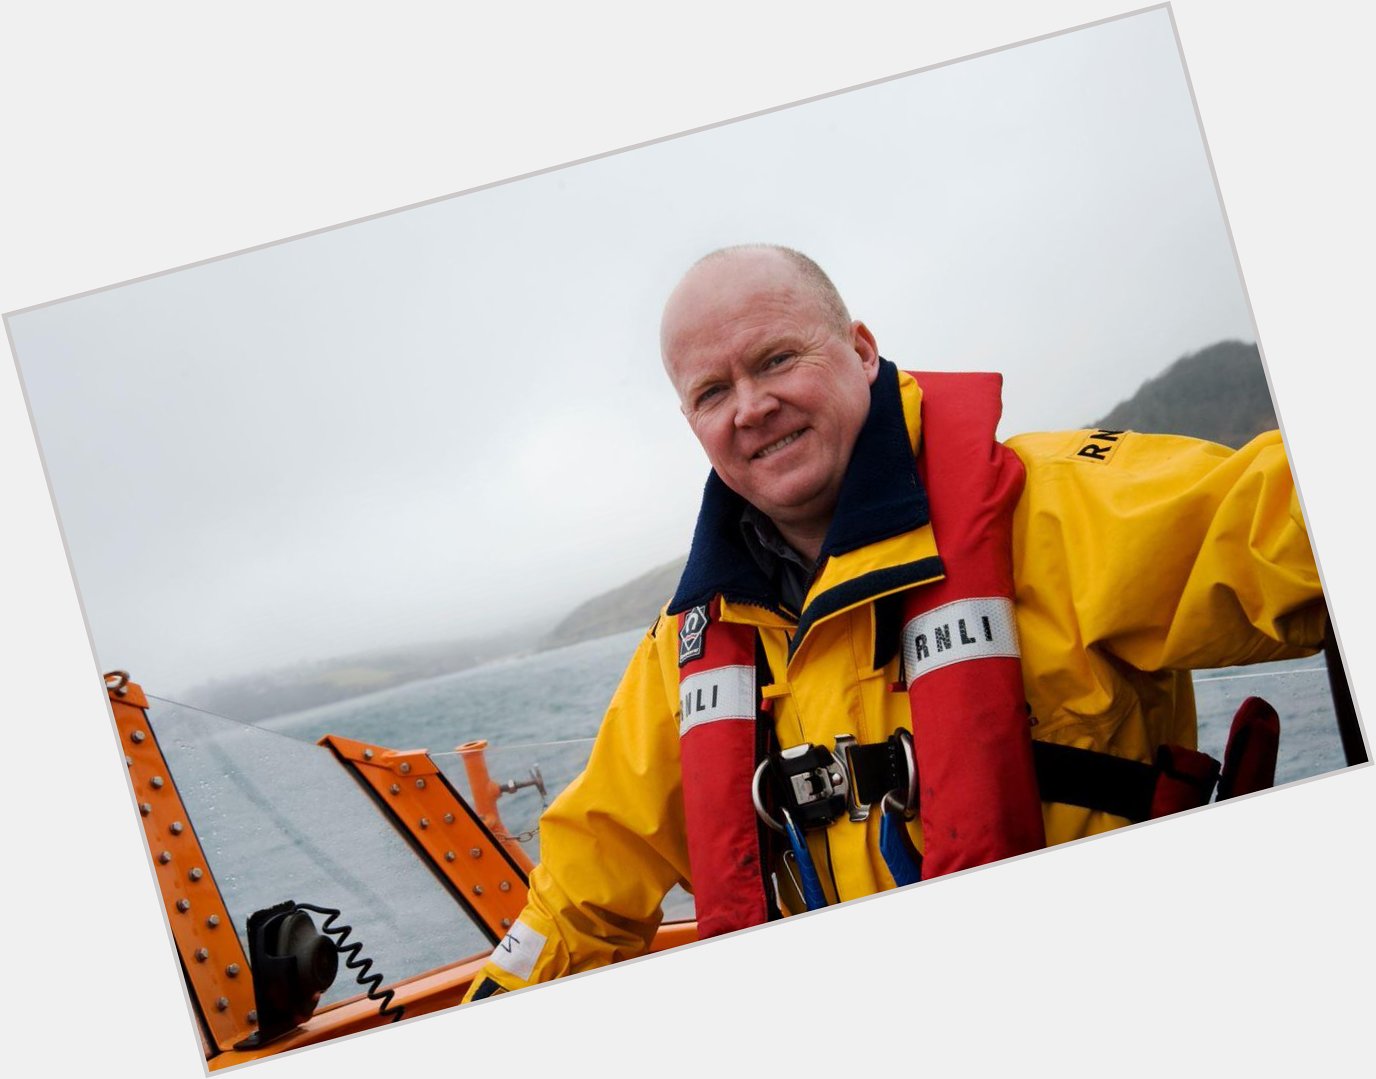  Happy Birthday to RNLI supporter Steve McFadden. We hope you have a great day.  